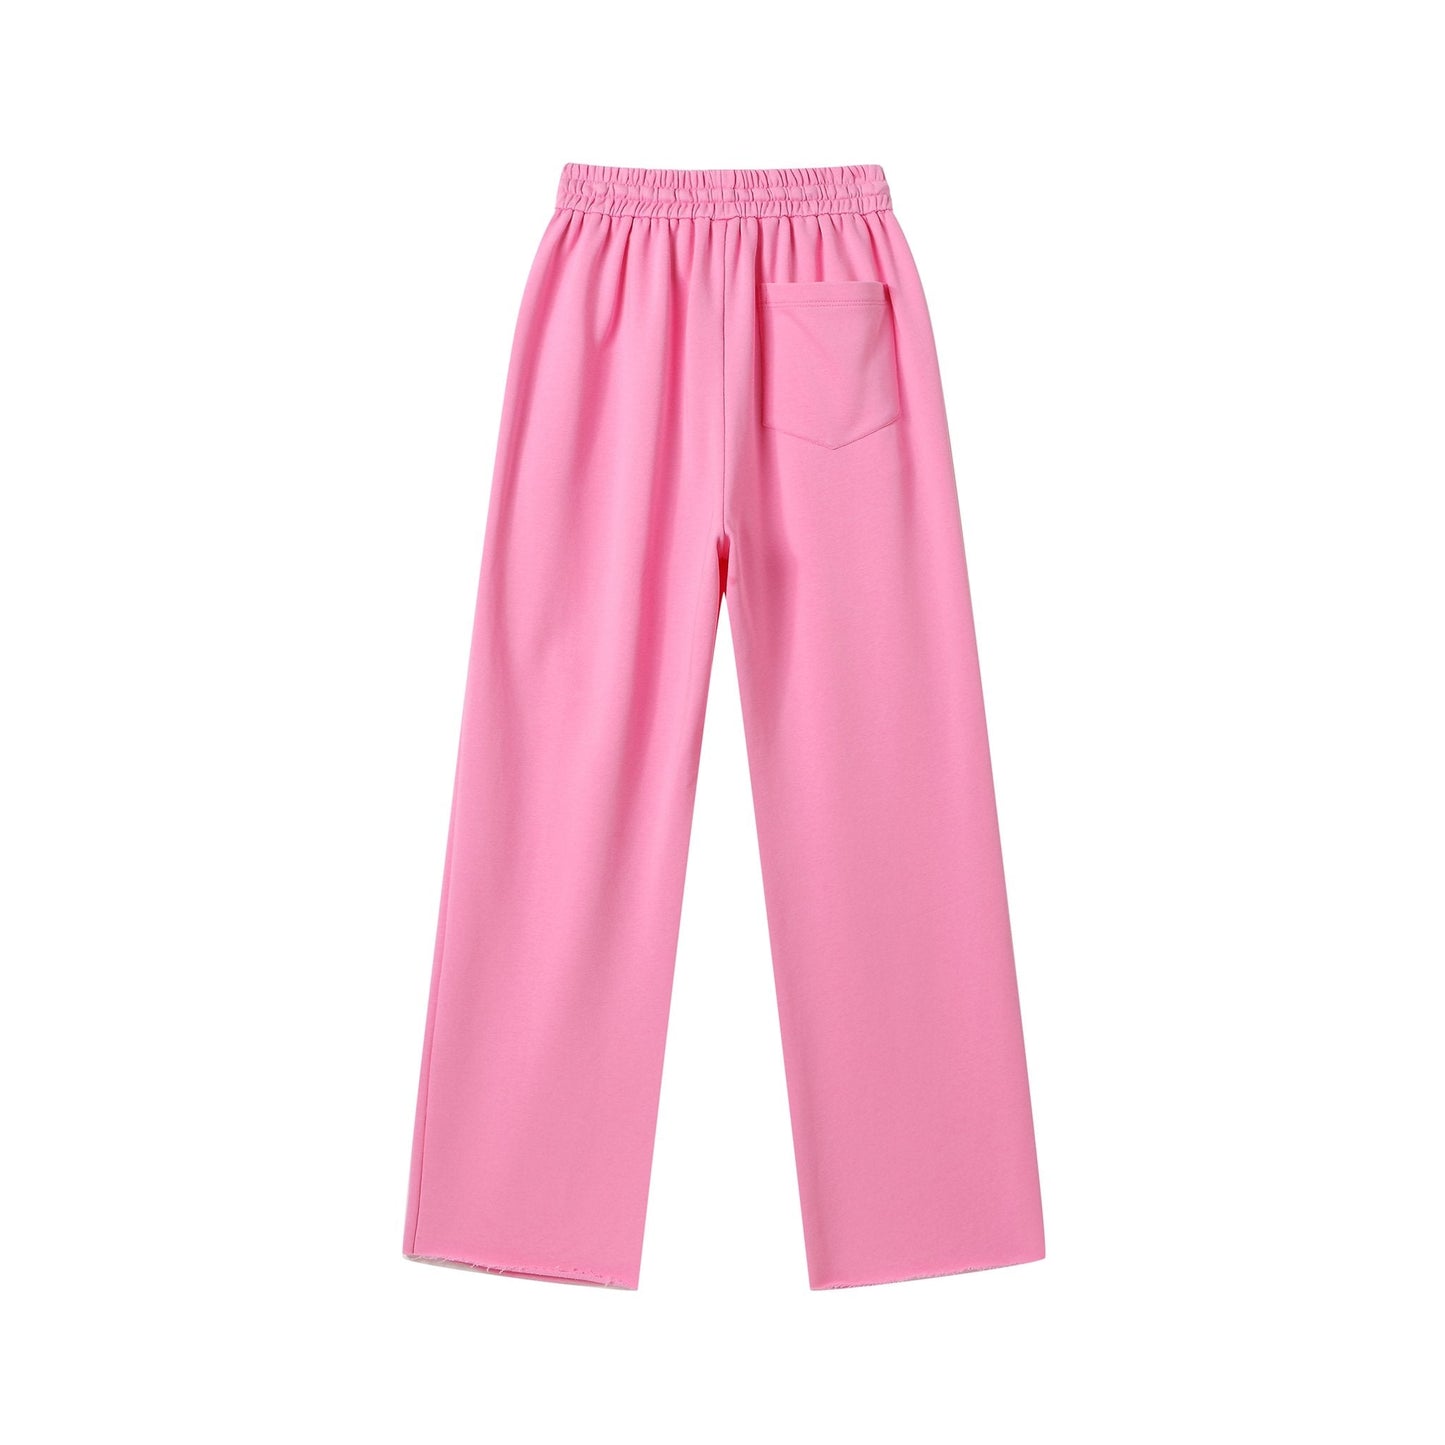 Andrea Martin Pink Drawstring Ripped Trousers